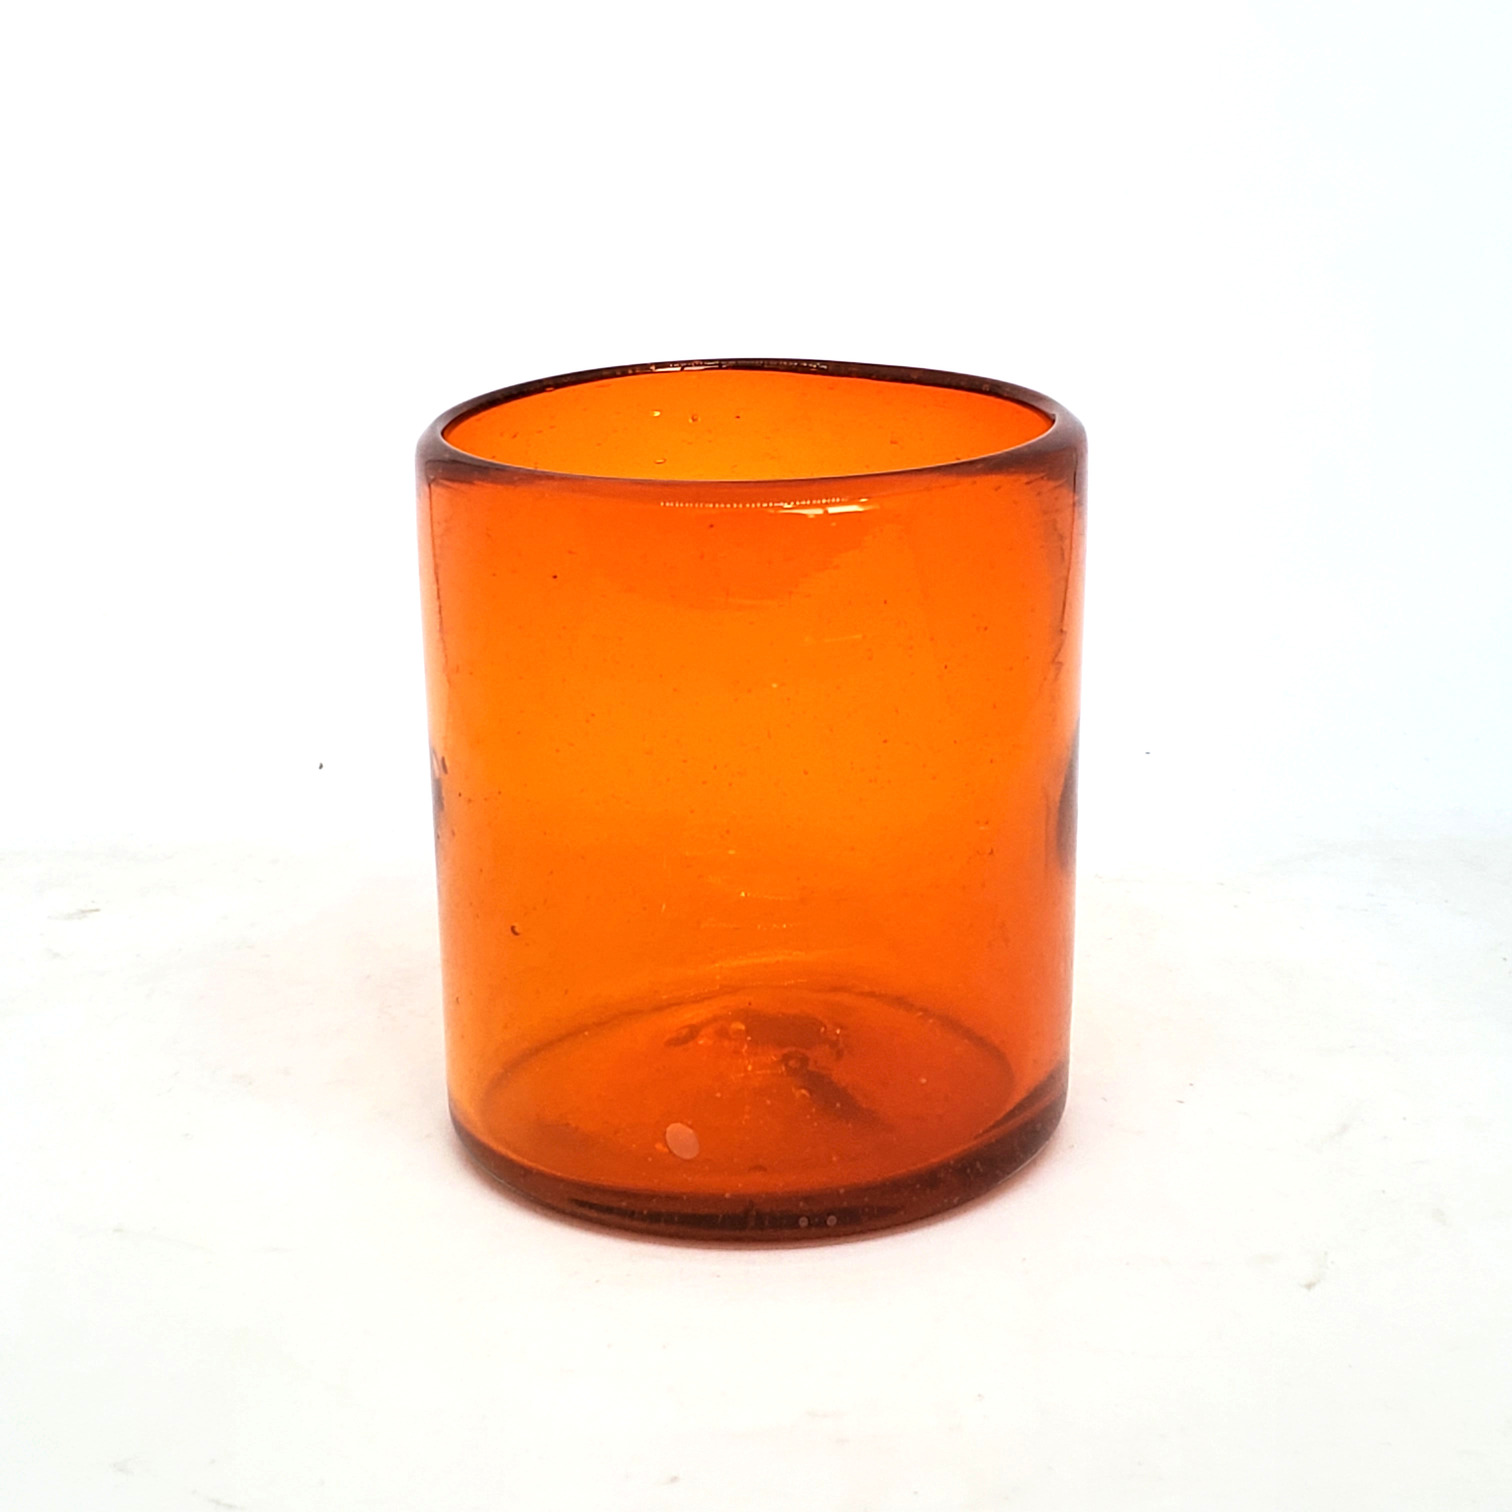 MEXICAN GLASSWARE / Solid Orange 9 oz Short Tumblers (set of 6) / Enhance your favorite drink with these colorful handcrafted glasses.